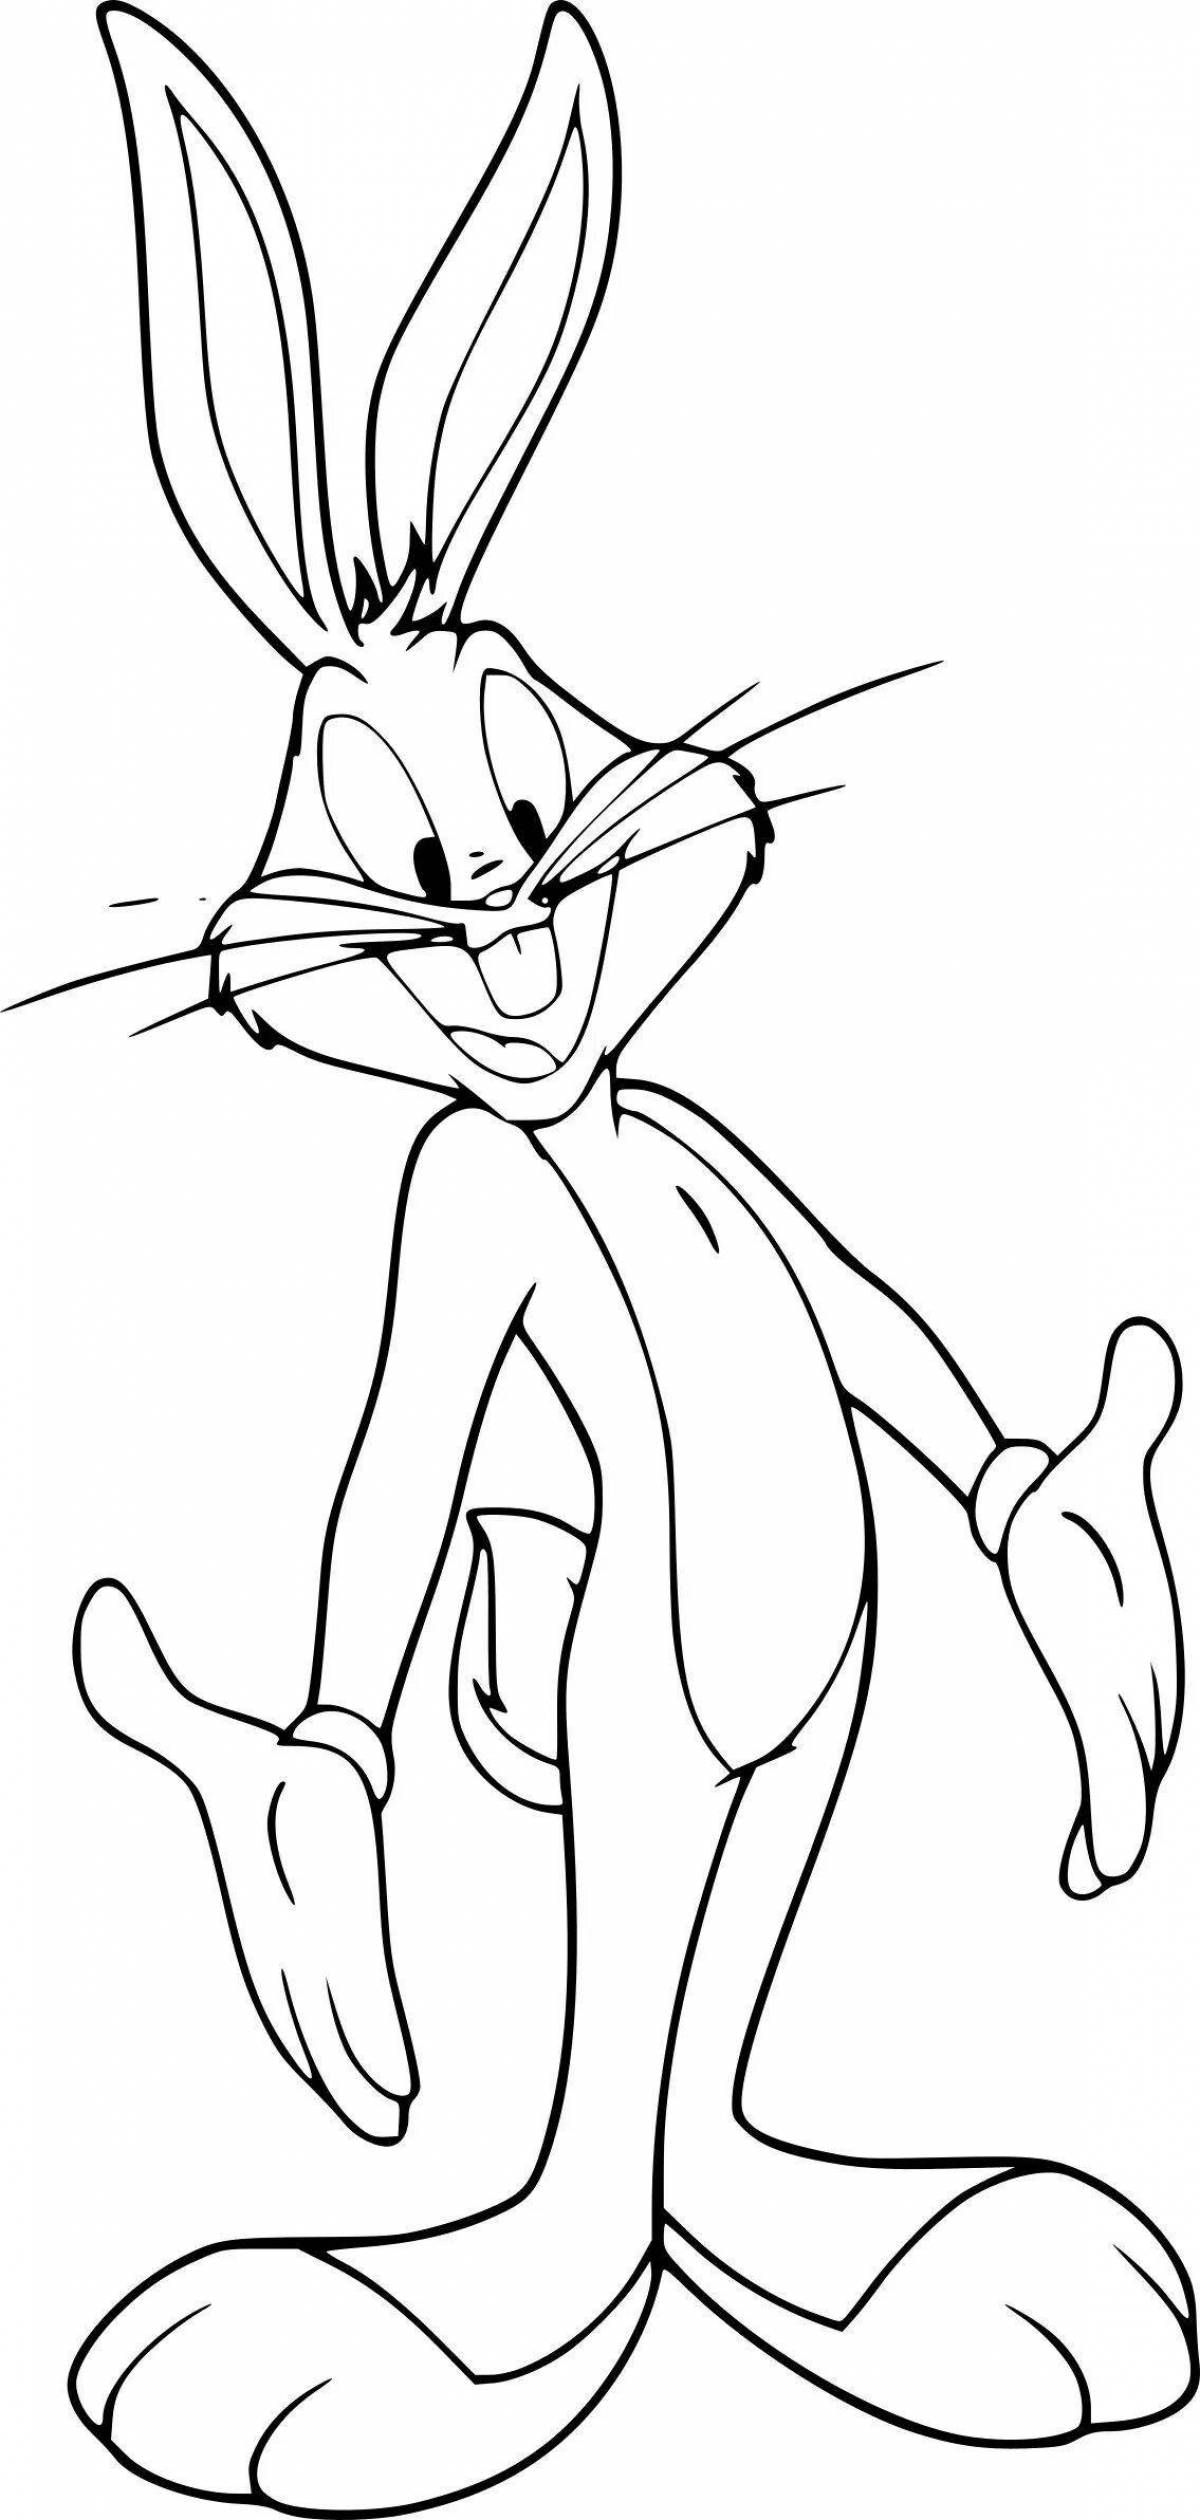 Colorful roger rabbit coloring page